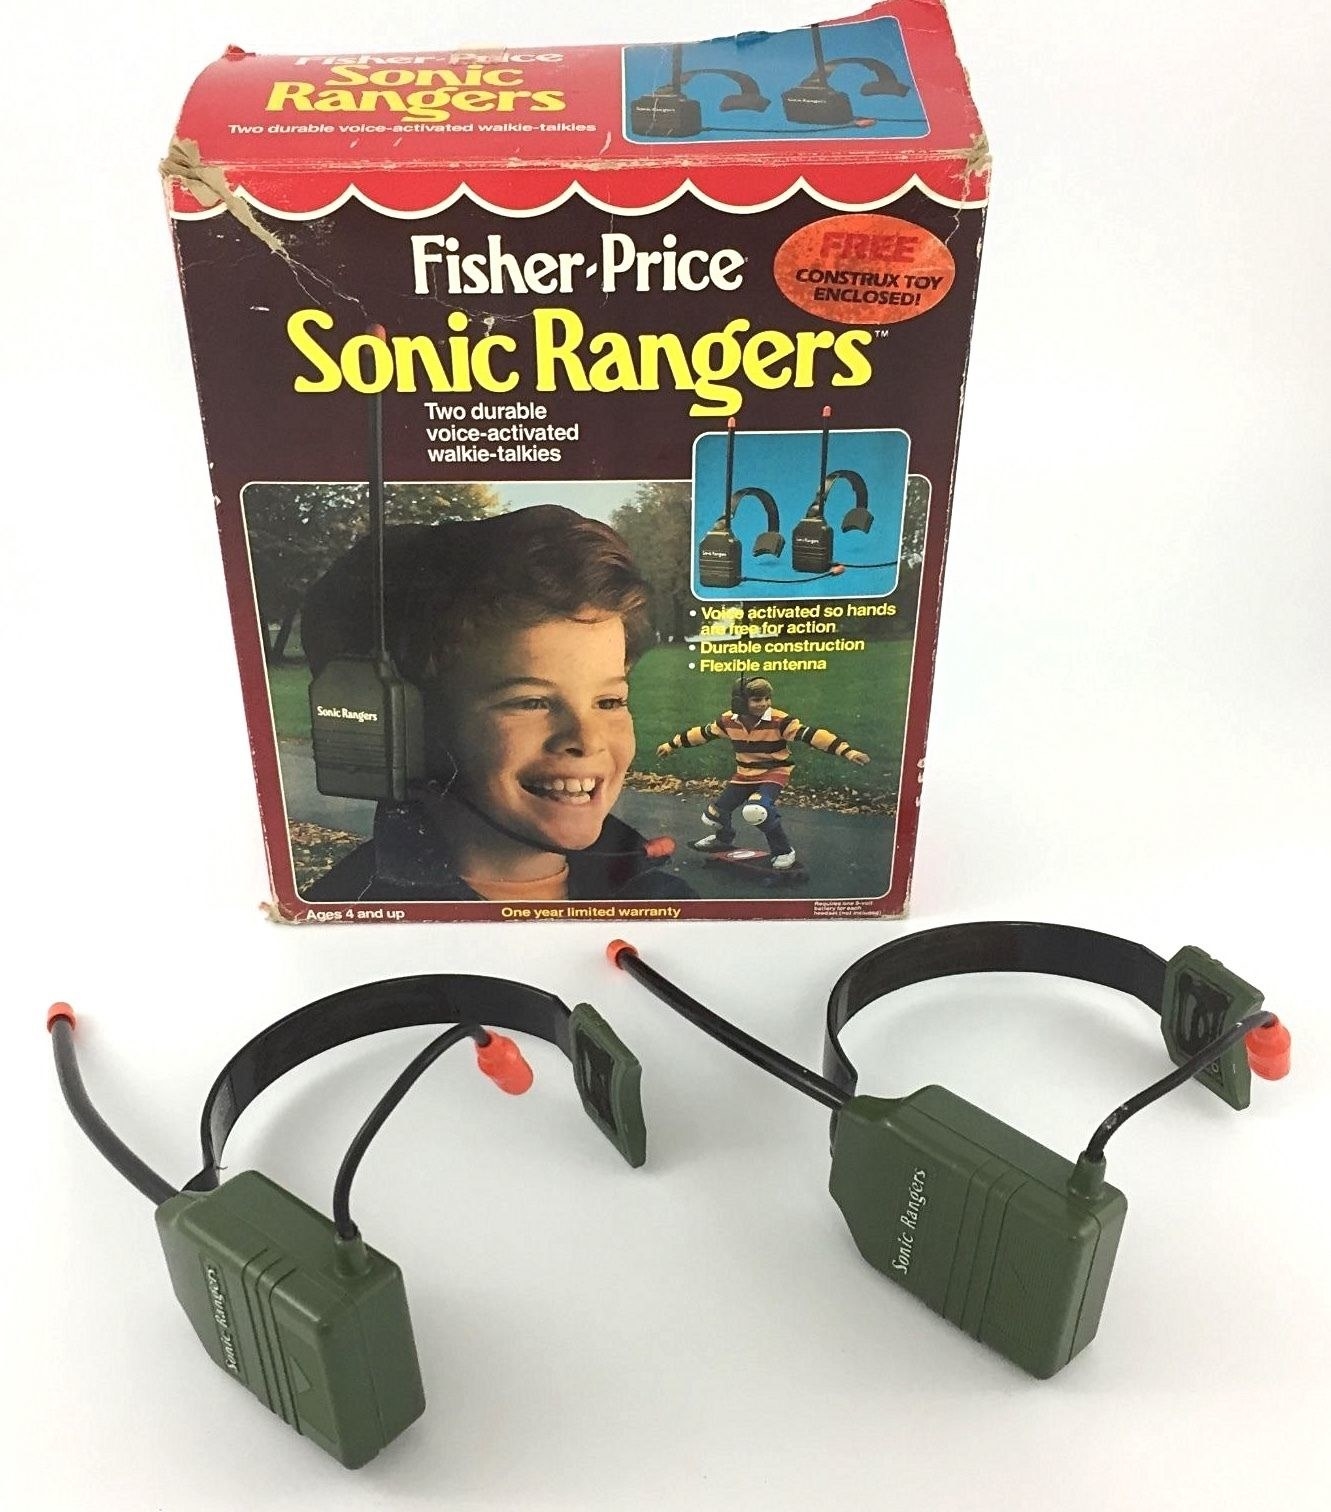 The original Fisher-Price Sonic Rangers box with the two headsets displayed in front of it